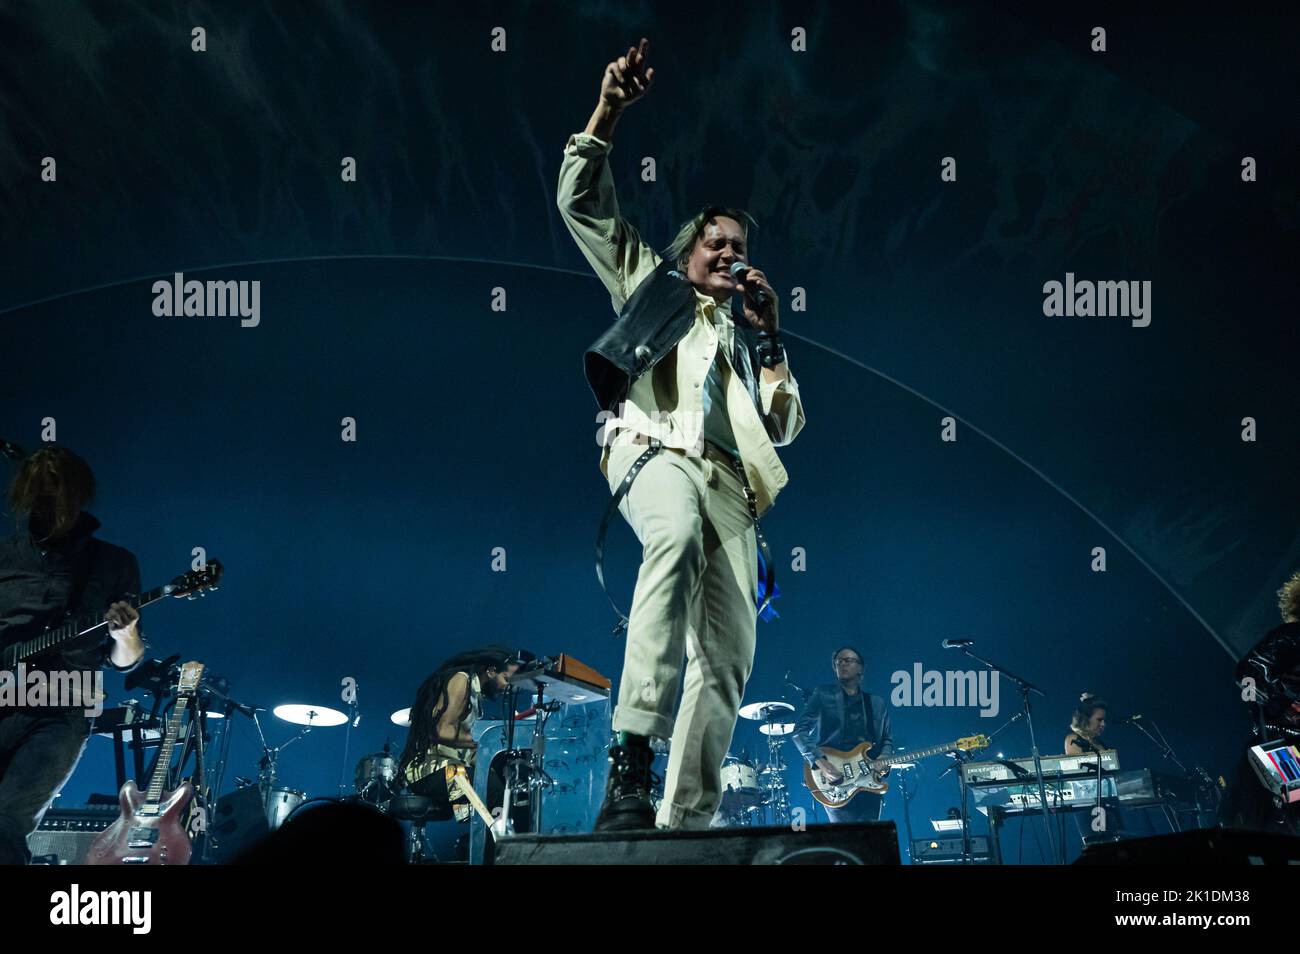 Milan, Italy. 17th Sep, 2022. Milan, Italy - September 17, 2022: Musician and lead singer Win Butler of Arcade Fire performs on stage during the ‘The We Tour' at Mediolanum Forum in Assago, Italy (Photo by Piero Cruciatti/Sipa USA) Credit: Sipa USA/Alamy Live News Stock Photo